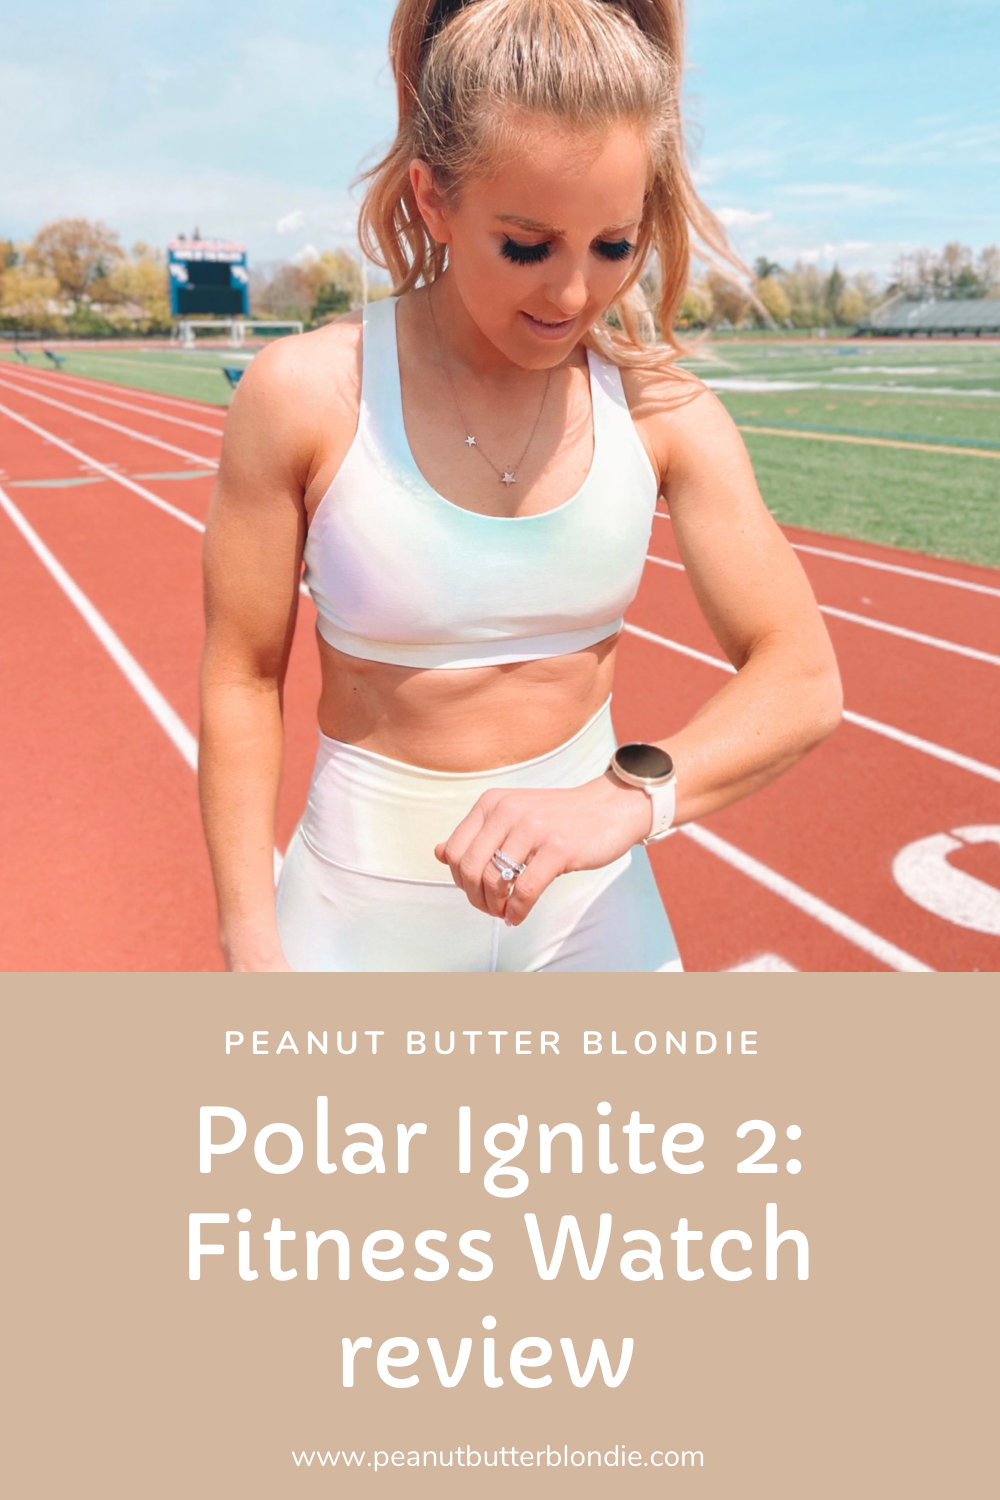 Polar Ignite 2 fitness watch has an elegant look and gives you personalized  workout tips » Gadget Flow